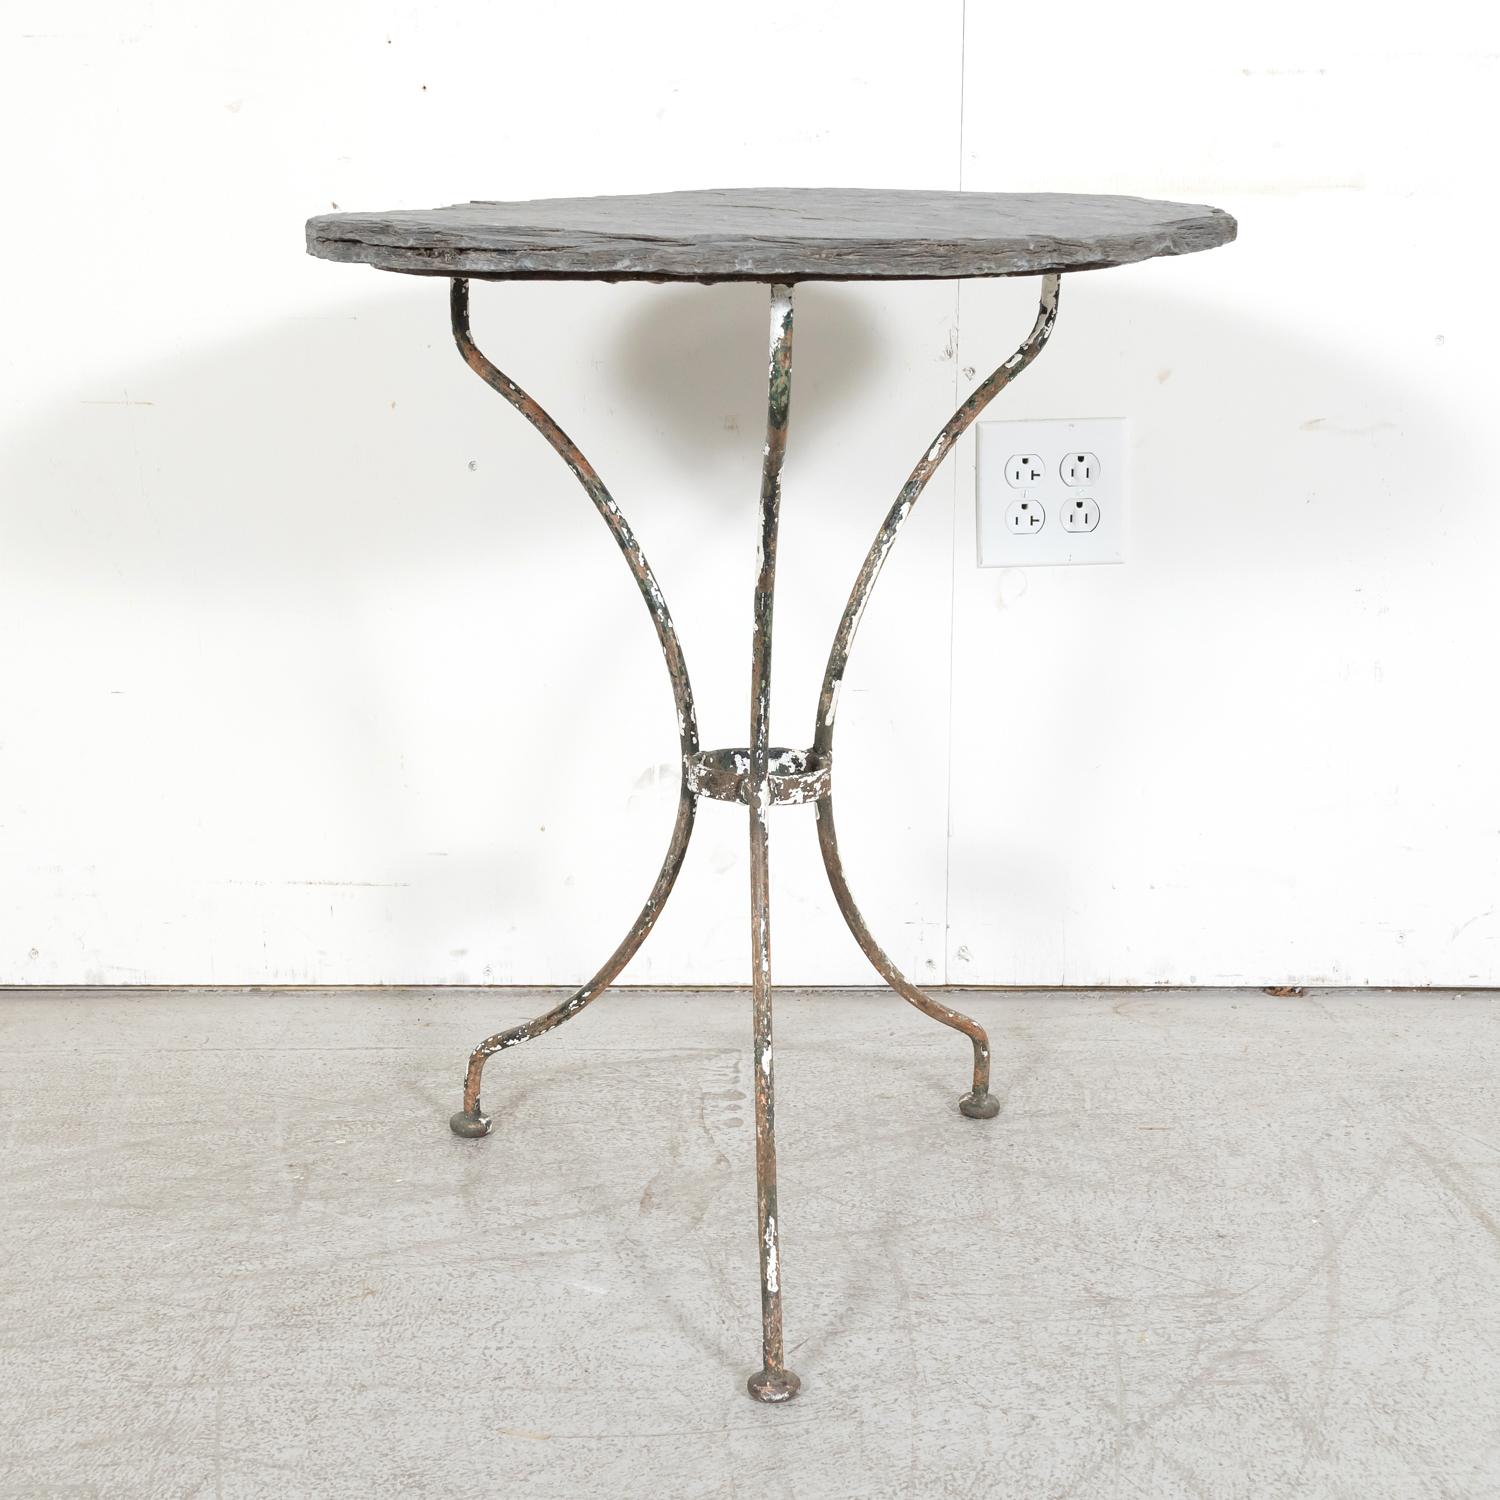 Painted 19th Century French Bistro or Garden Table with Round Slate Top and Iron Base For Sale